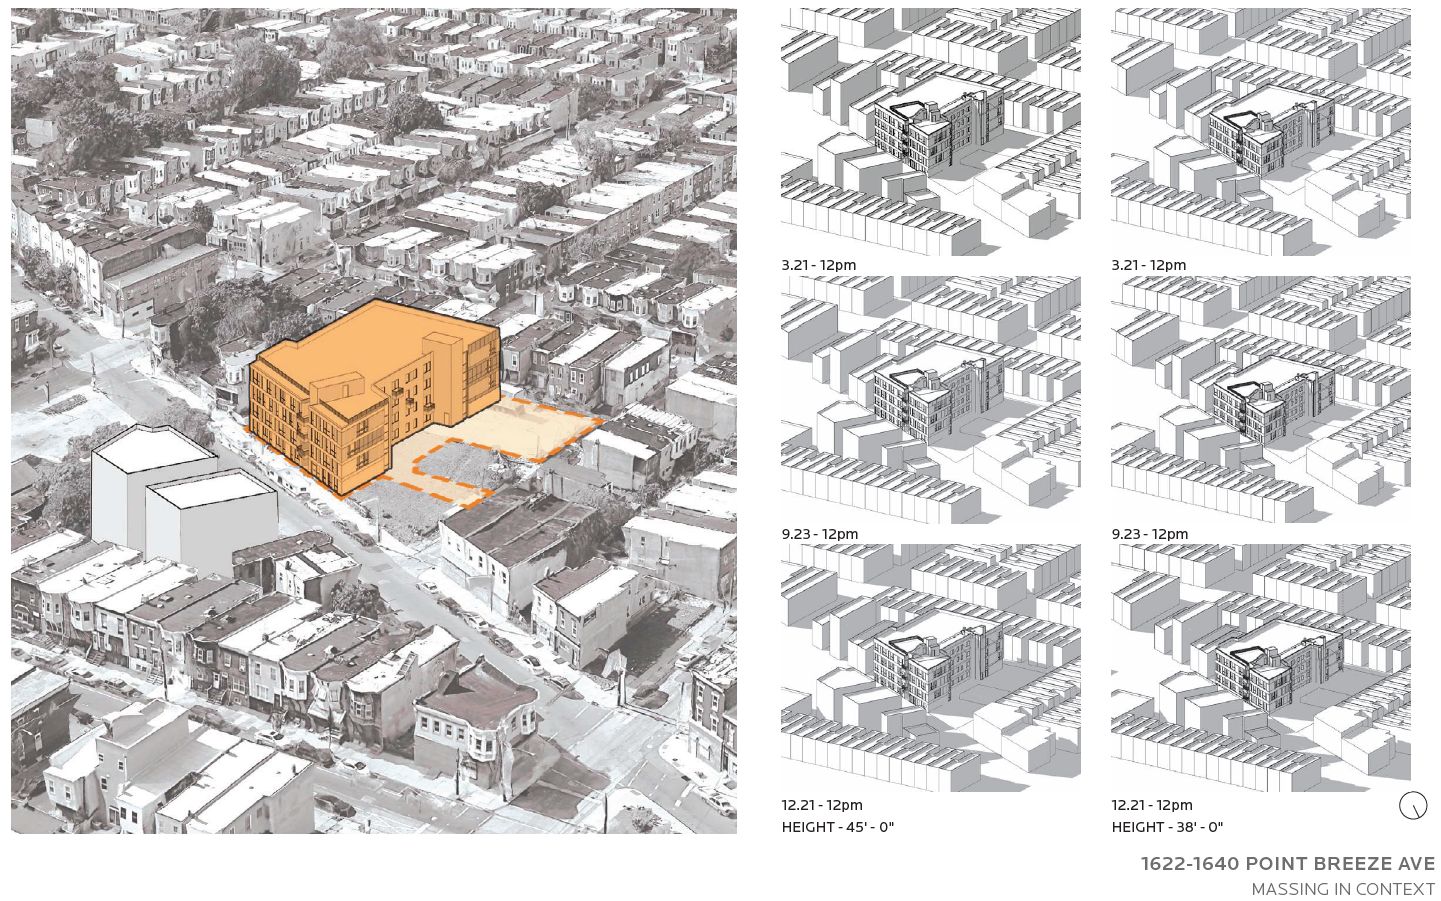 1622-40 Point Breeze Avenue. Project massing and shadow studies. Credit: JKRP Architects via the Civic Design Review